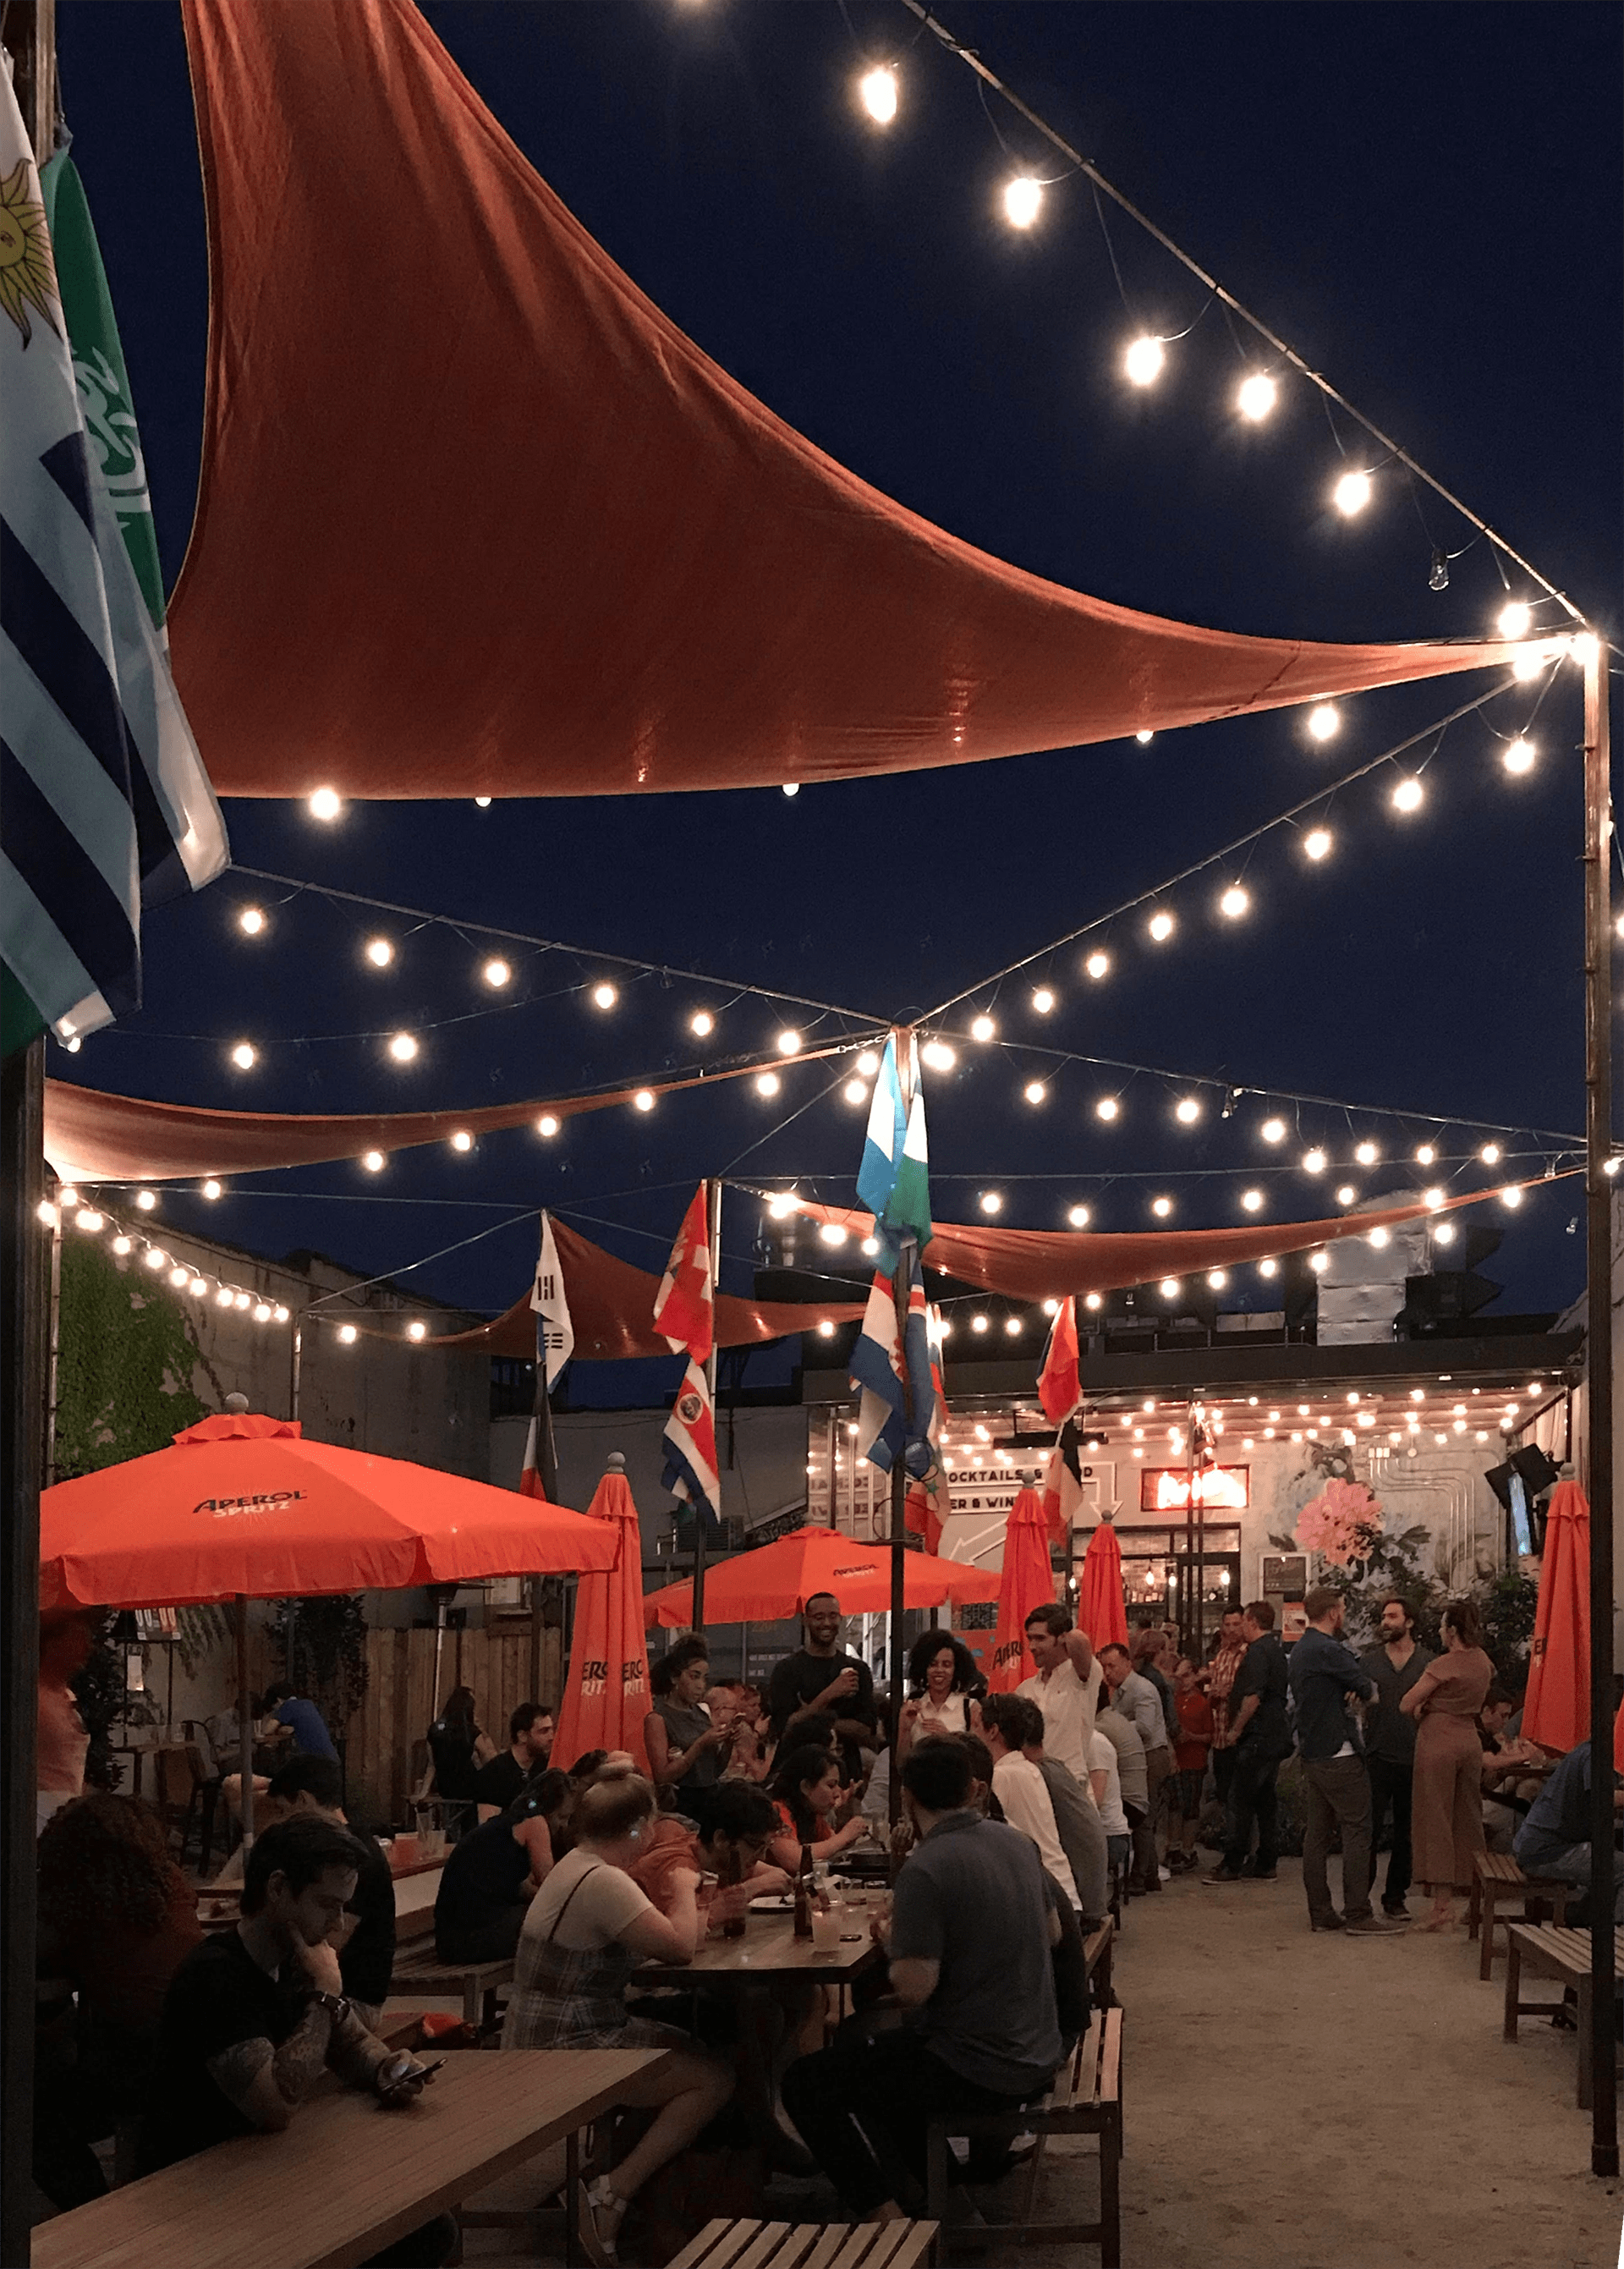 Courtyard of Parklife at night, with strings of lights, triangular orange awnings, and orange Aperol umbrellas. Groups of people sit at picnic tables and stand, talking and drinking.